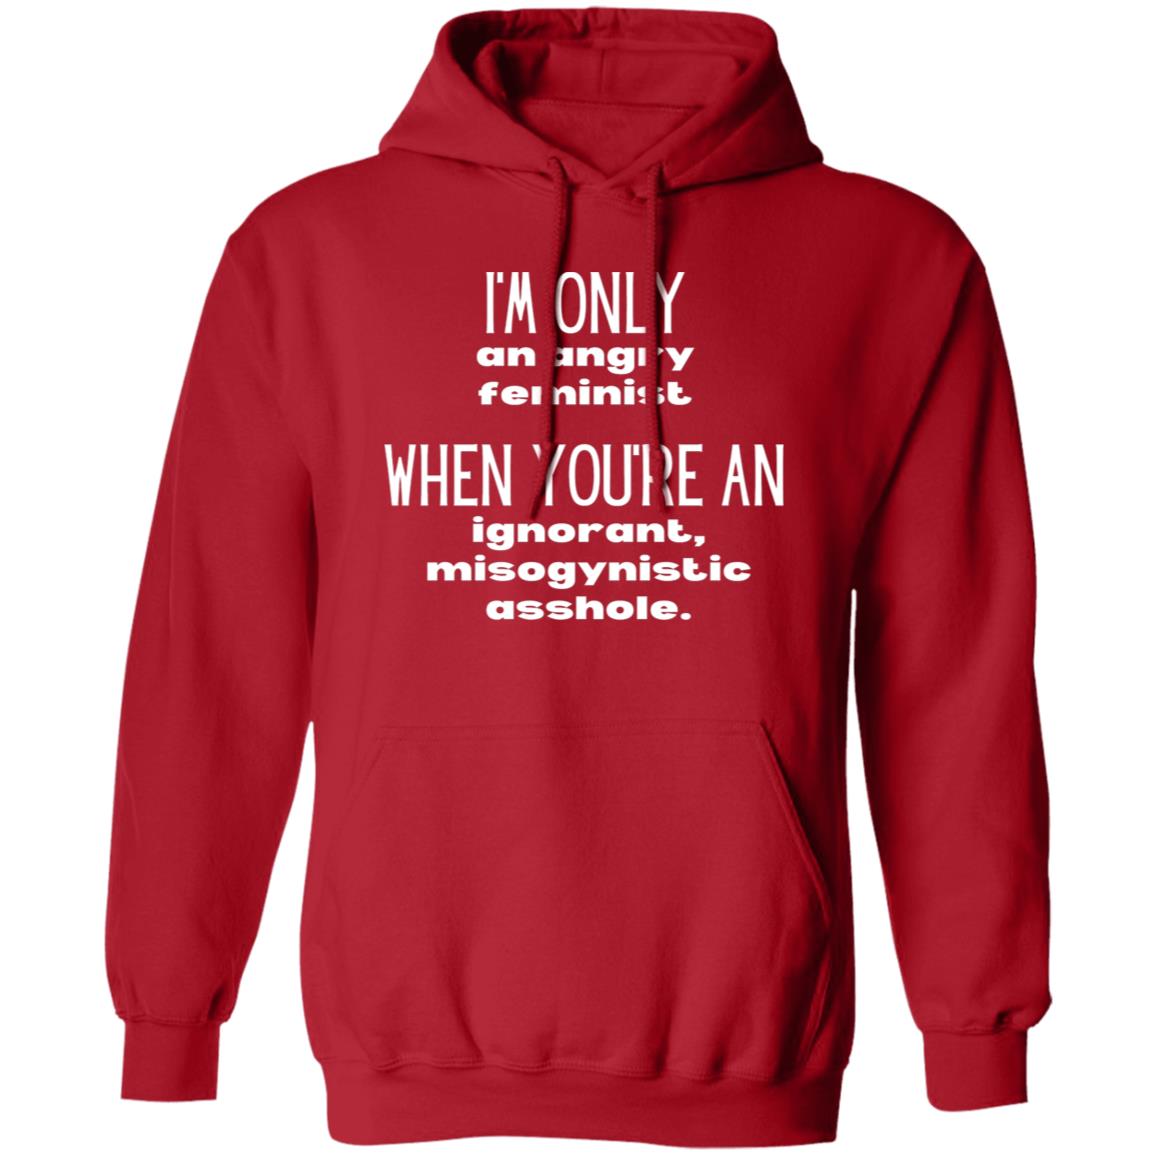 I'm Only An Angry Feminist Hooded Sweatshirt